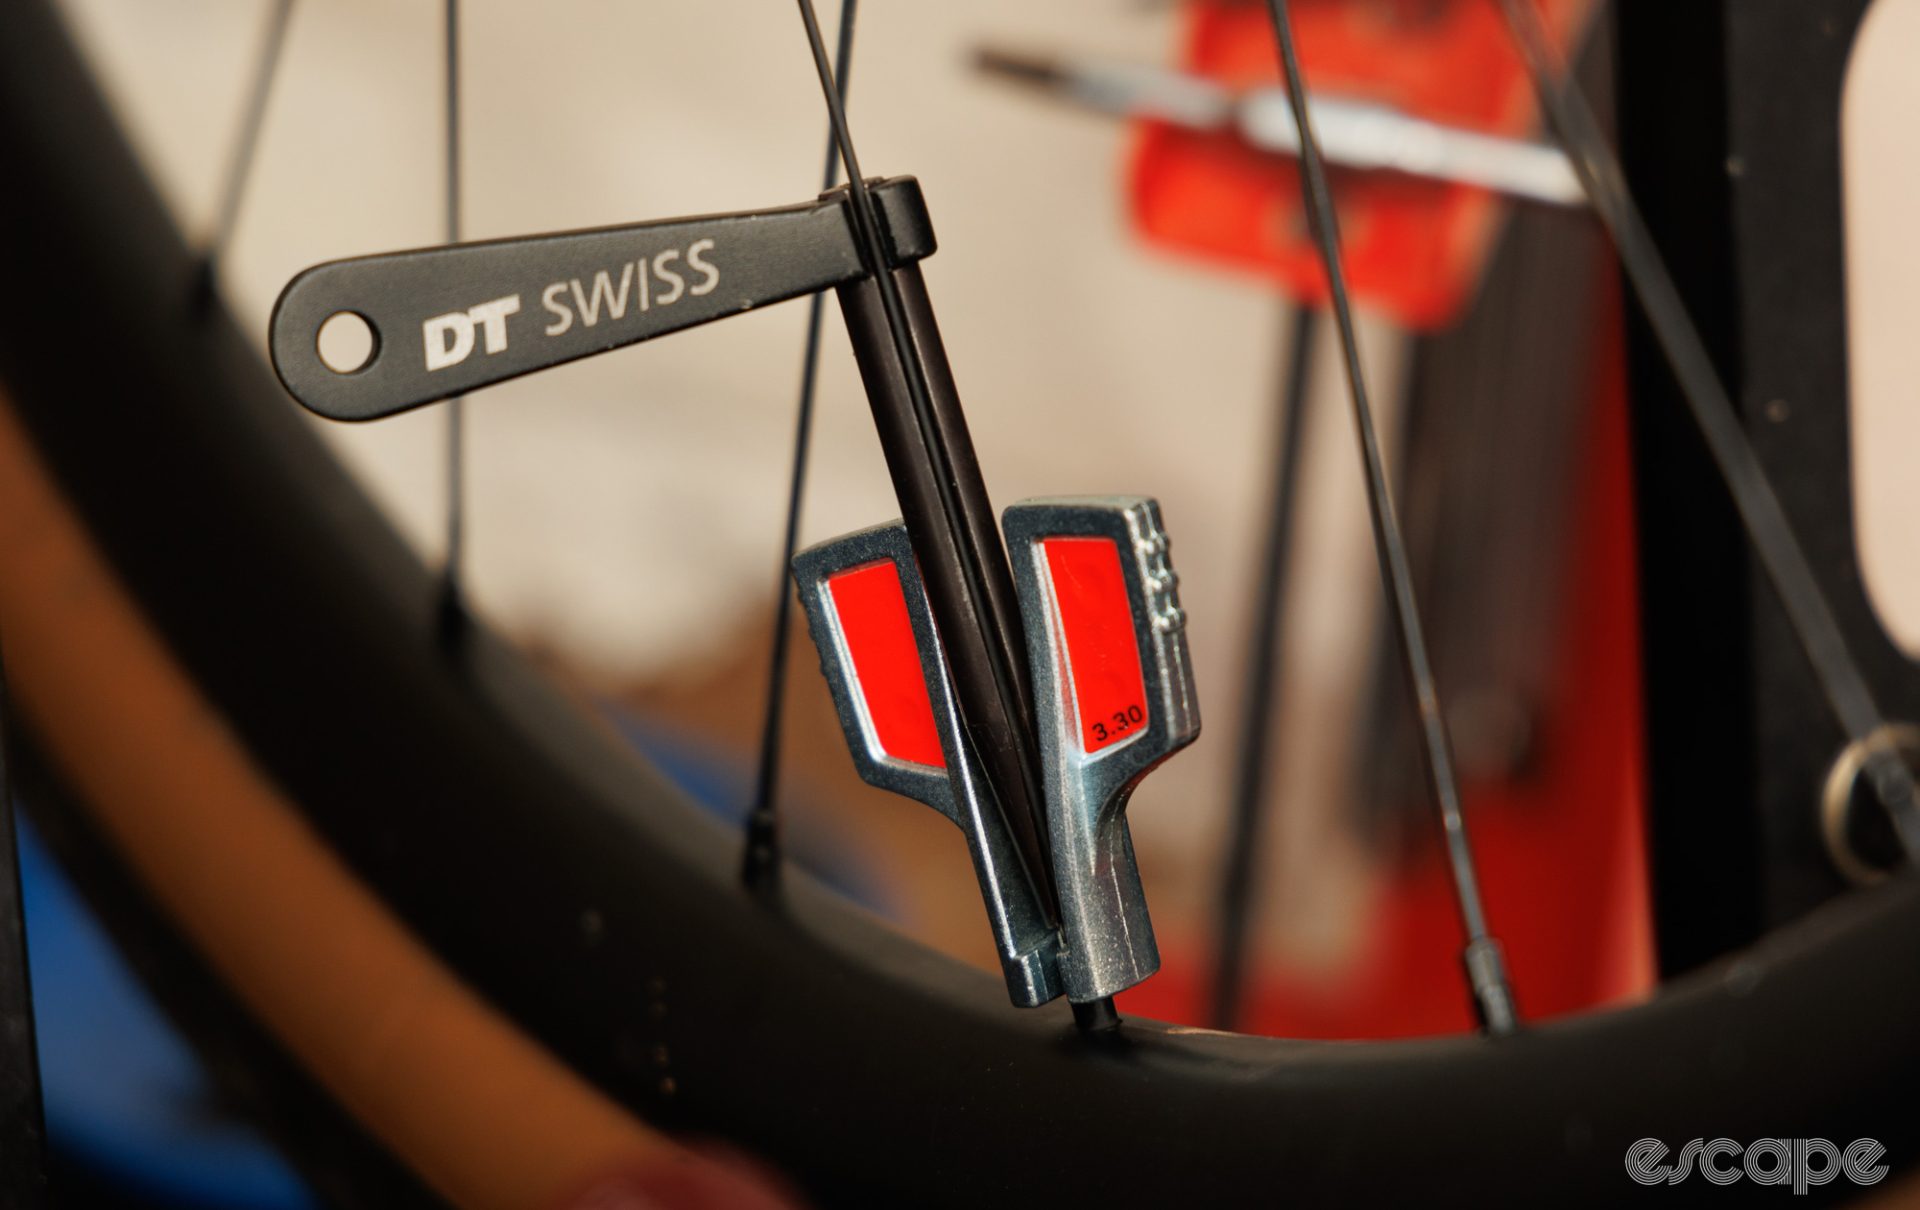 The Unior spoke key paired with a DT Swiss bladed spoke holder, all placed on a wheel. 